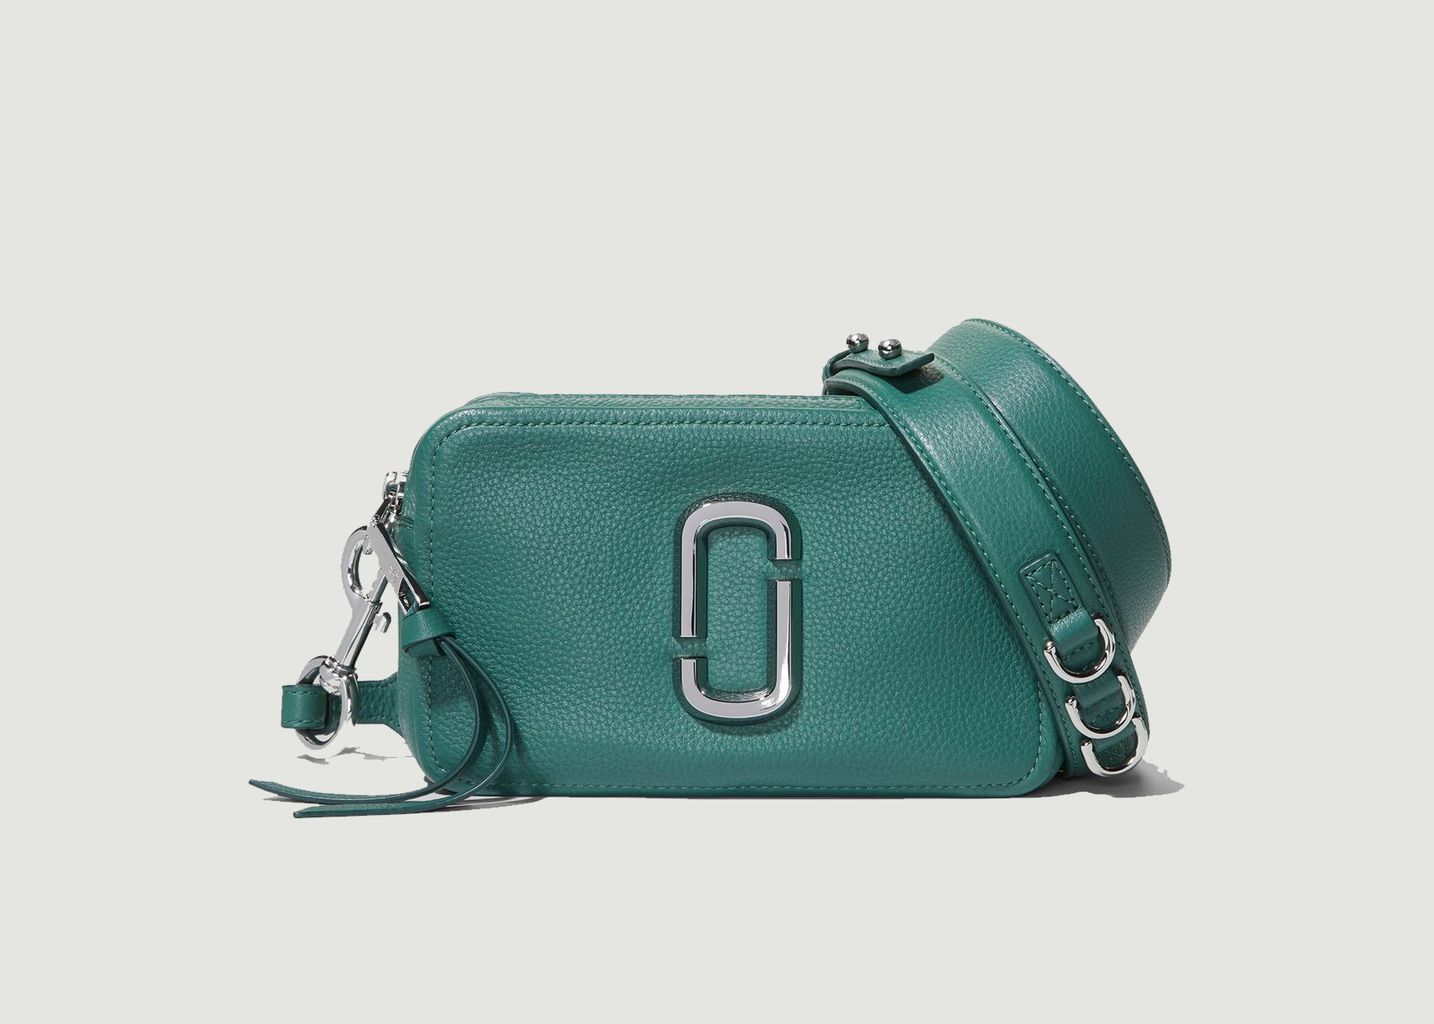 The Softshot 21 leather bag - Marc Jacobs